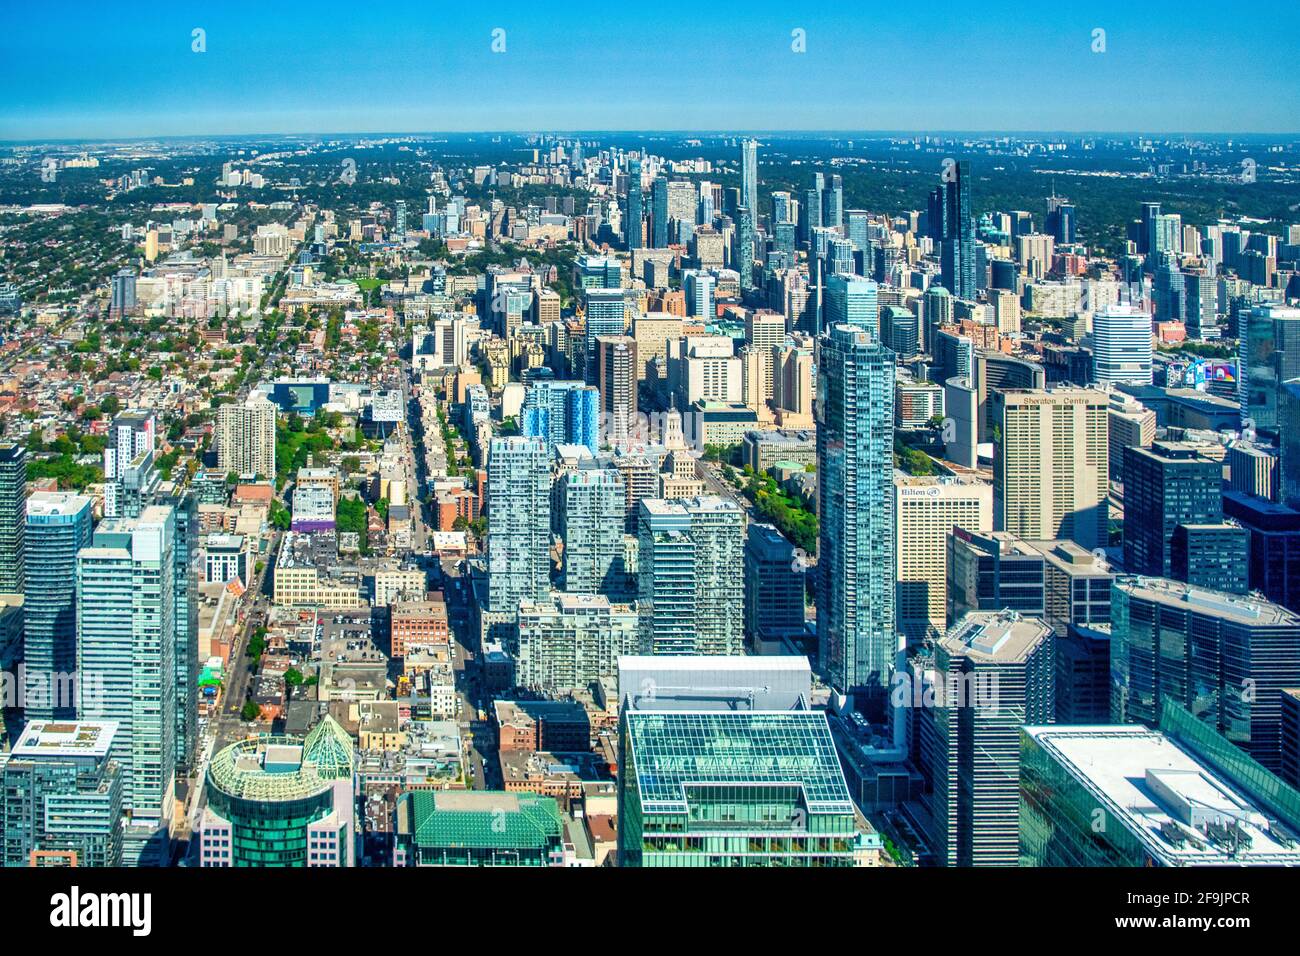 Cityscape and skyline, aerial view, Toronto, Canada Stock Photo